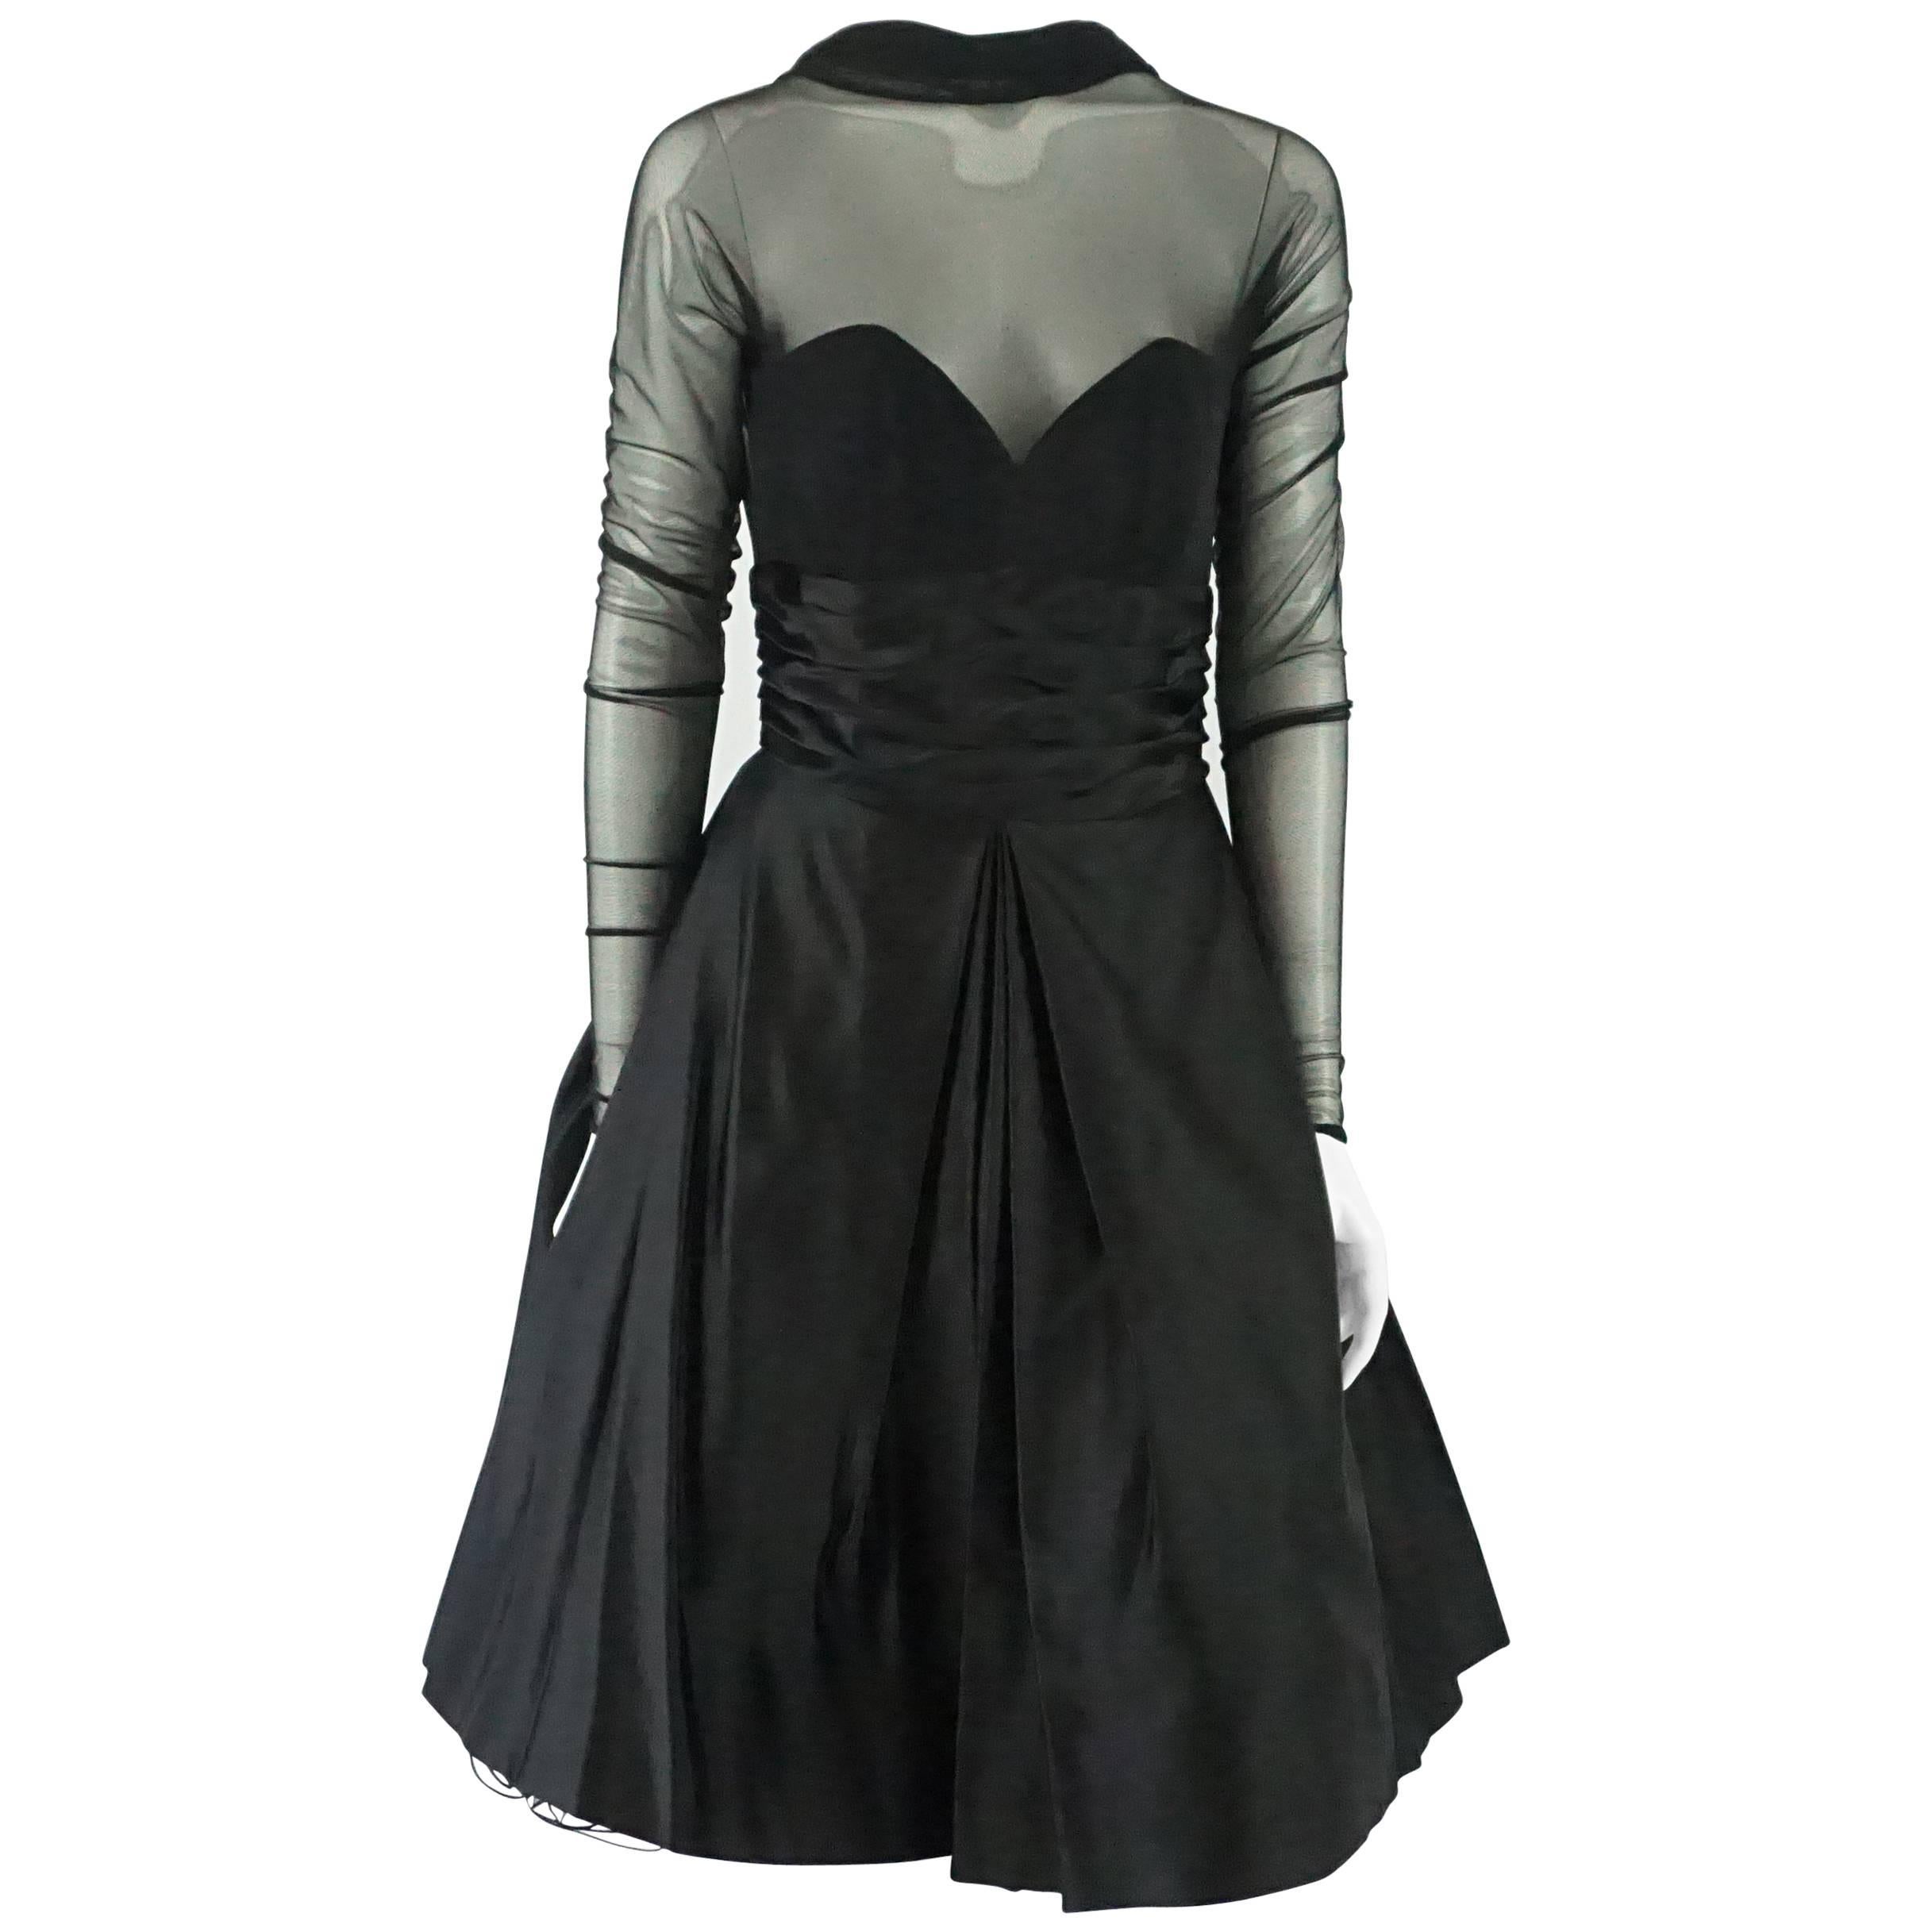 Vicky Tiel Couture 1980’s Black Evening Dress - Size 42 For Sale